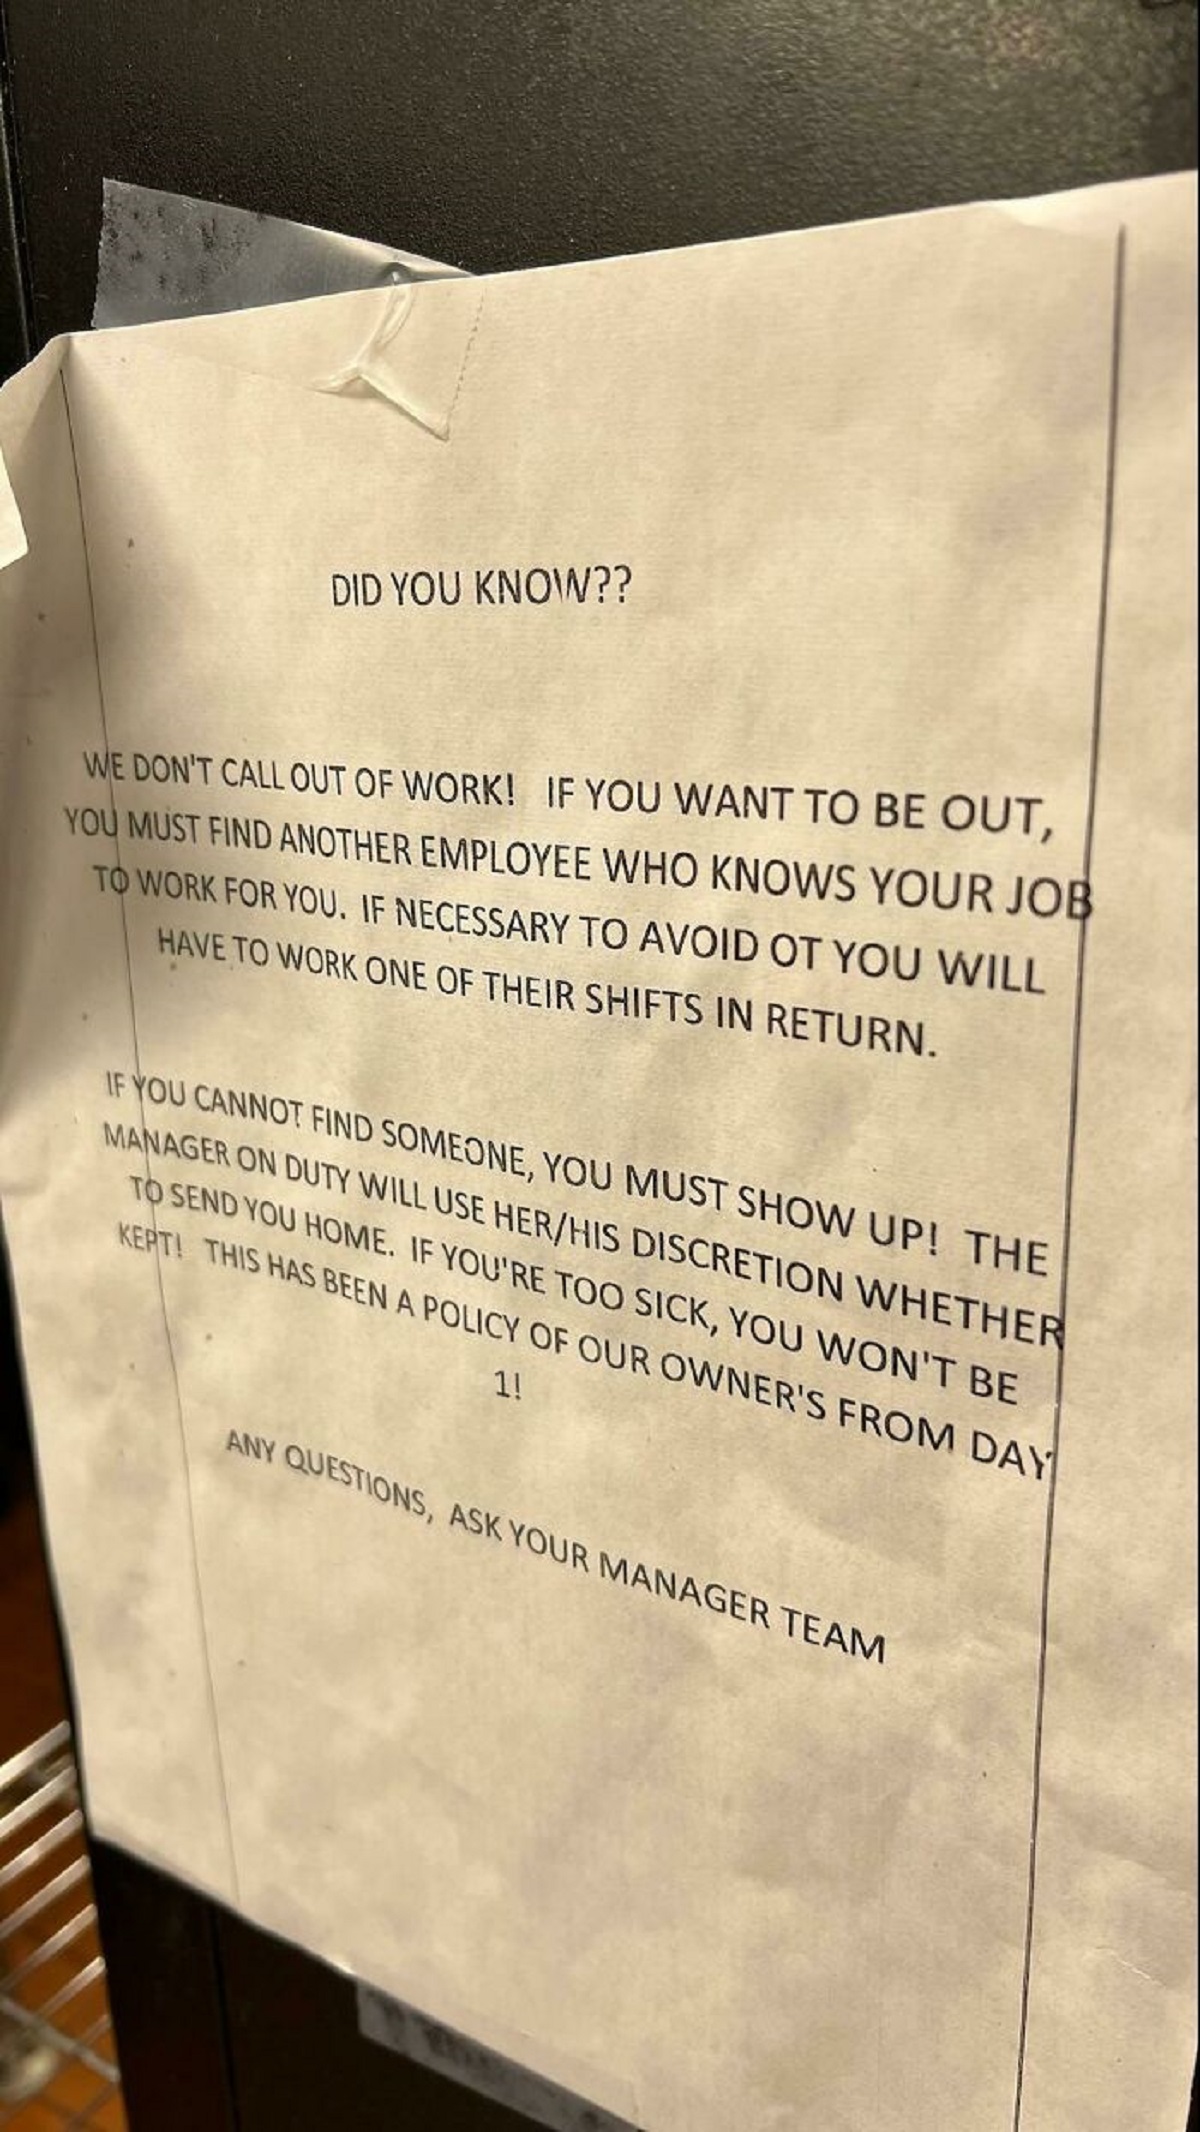 document - Did You Know?? We Don'T Call Out Of Work! If You Want To Be Out, You Must Find Another Employee Who Knows Your Job To Work For You. If Necessary To Avoid Ot You Will Wave To Work One Of Their Shifts In Return. You Cannot Find Someone, You Must 